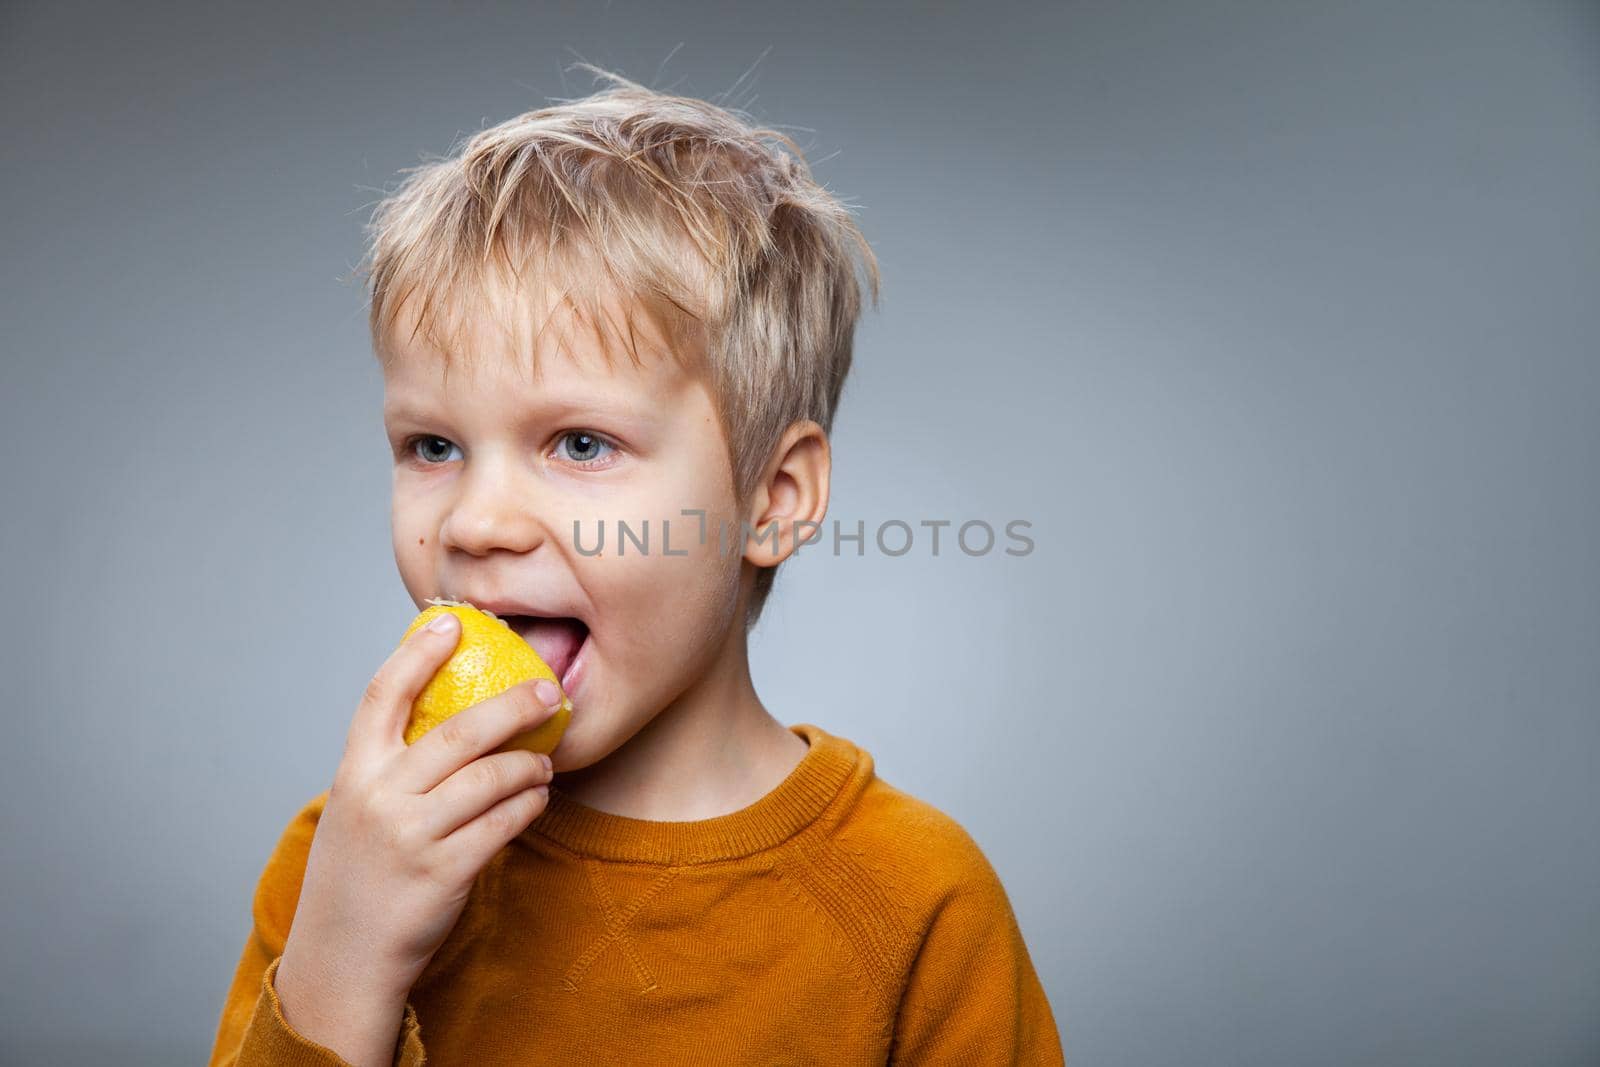 Adorable little boy with blond hair in casual clothes smiling while eating sour lemon against gray background